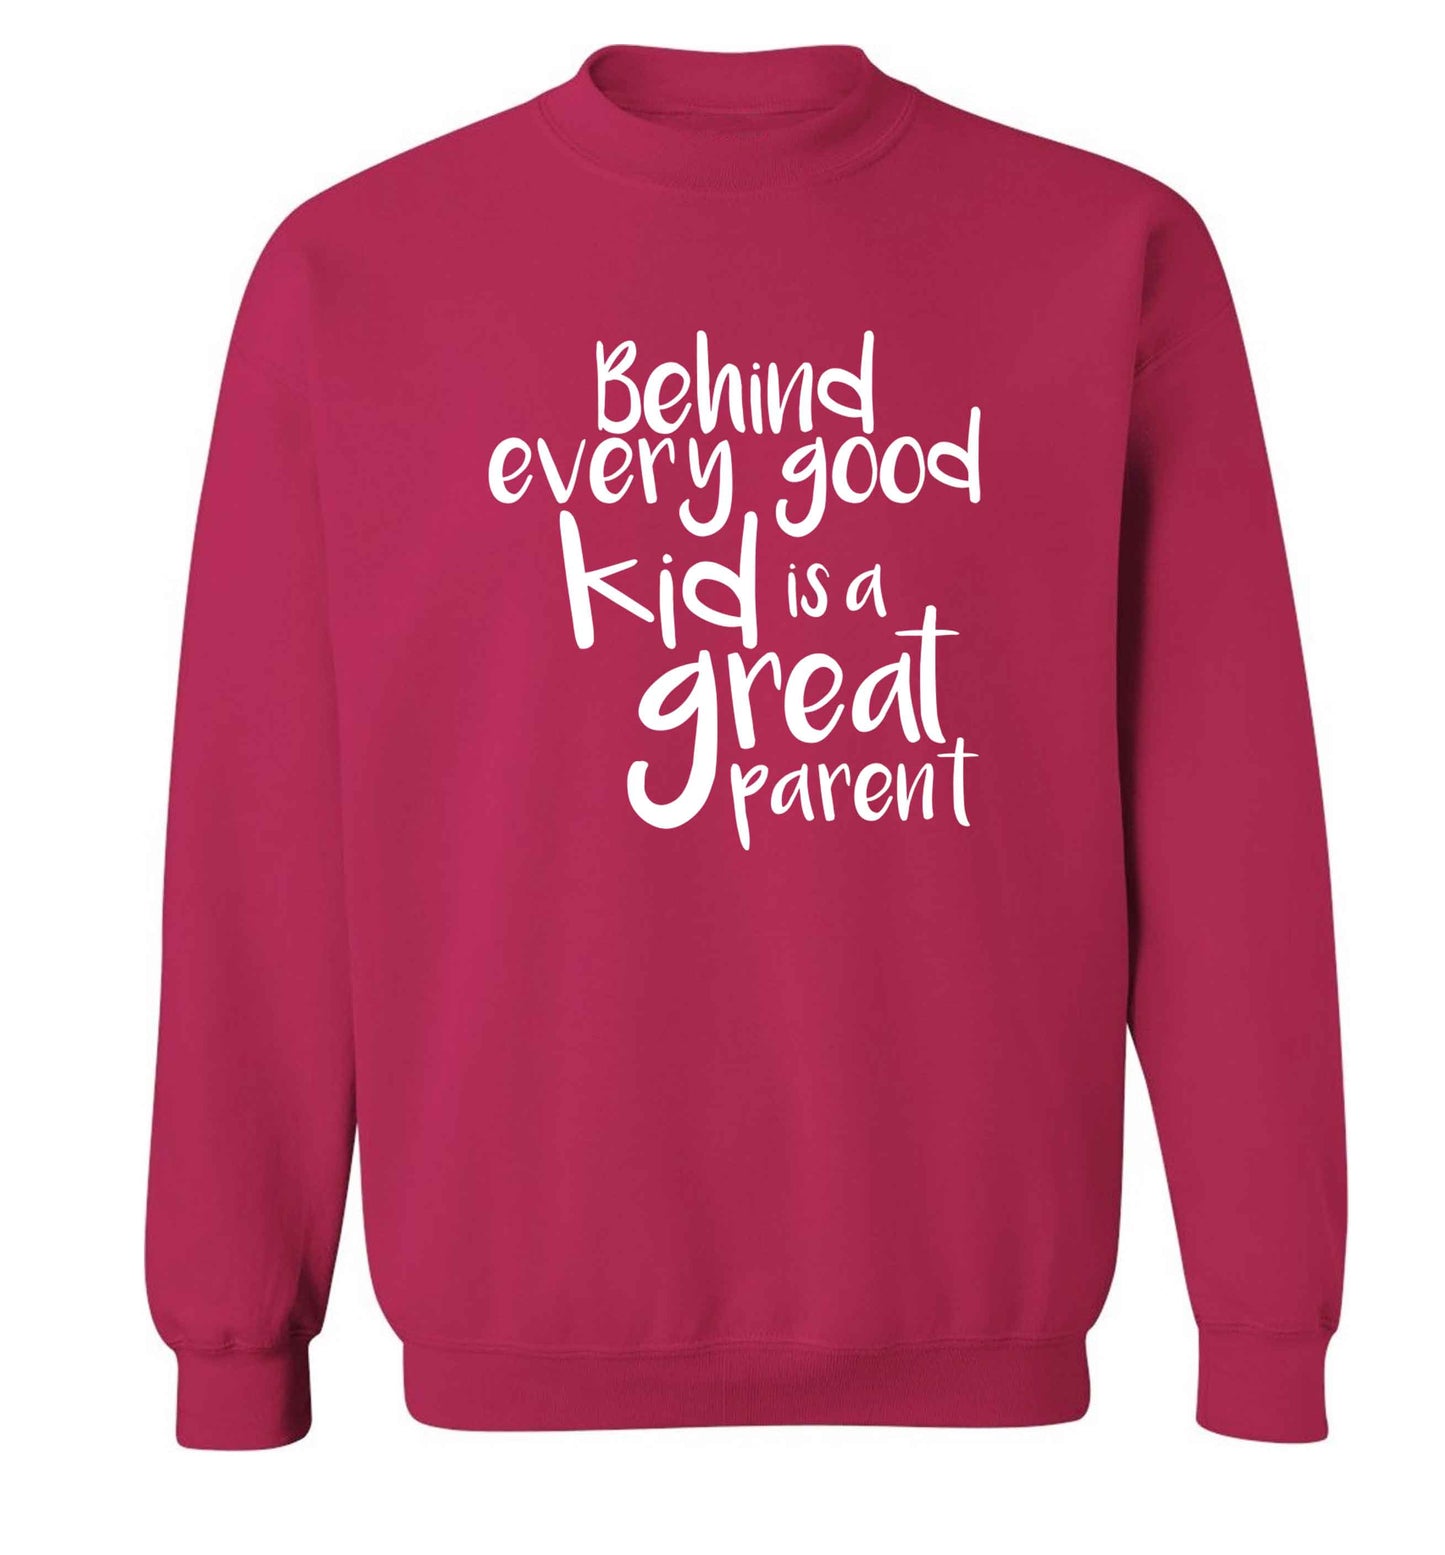 Behind every good kid is a great parent adult's unisex pink sweater 2XL